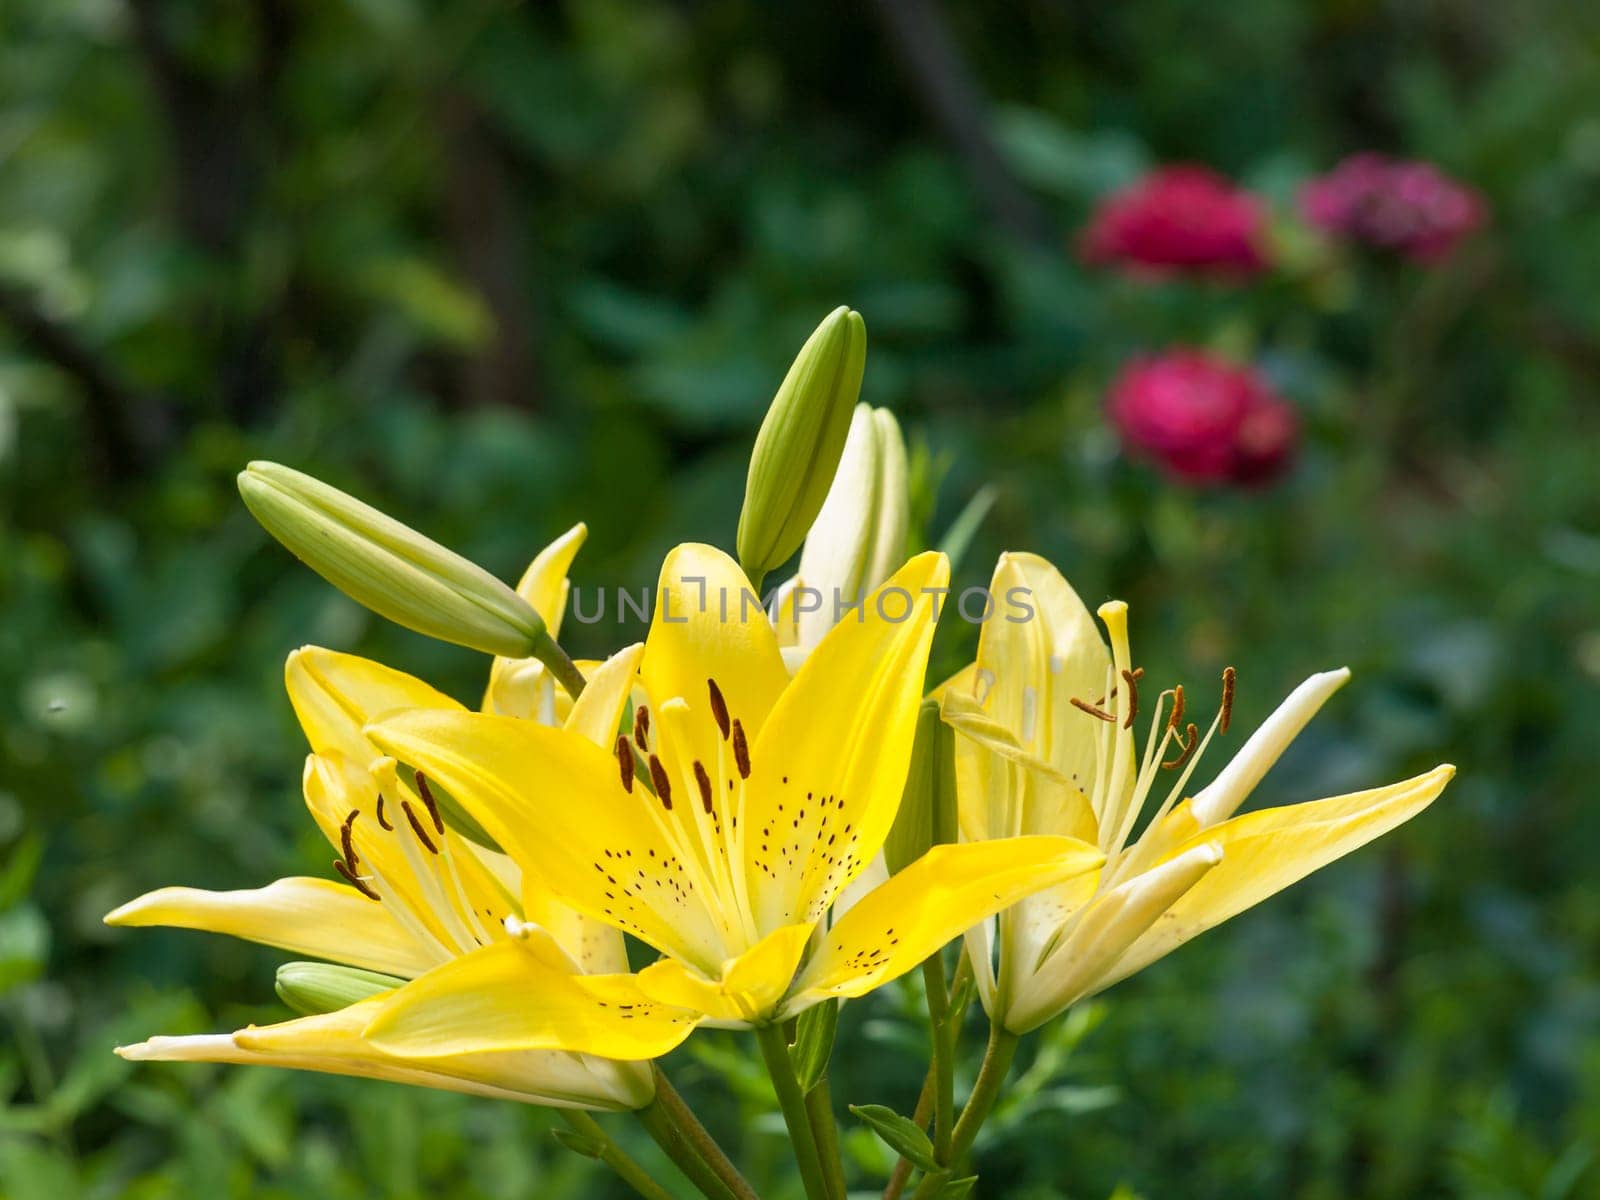 Yellow lily flowers in the summer garden on blurred green background. Shallow depth of field.